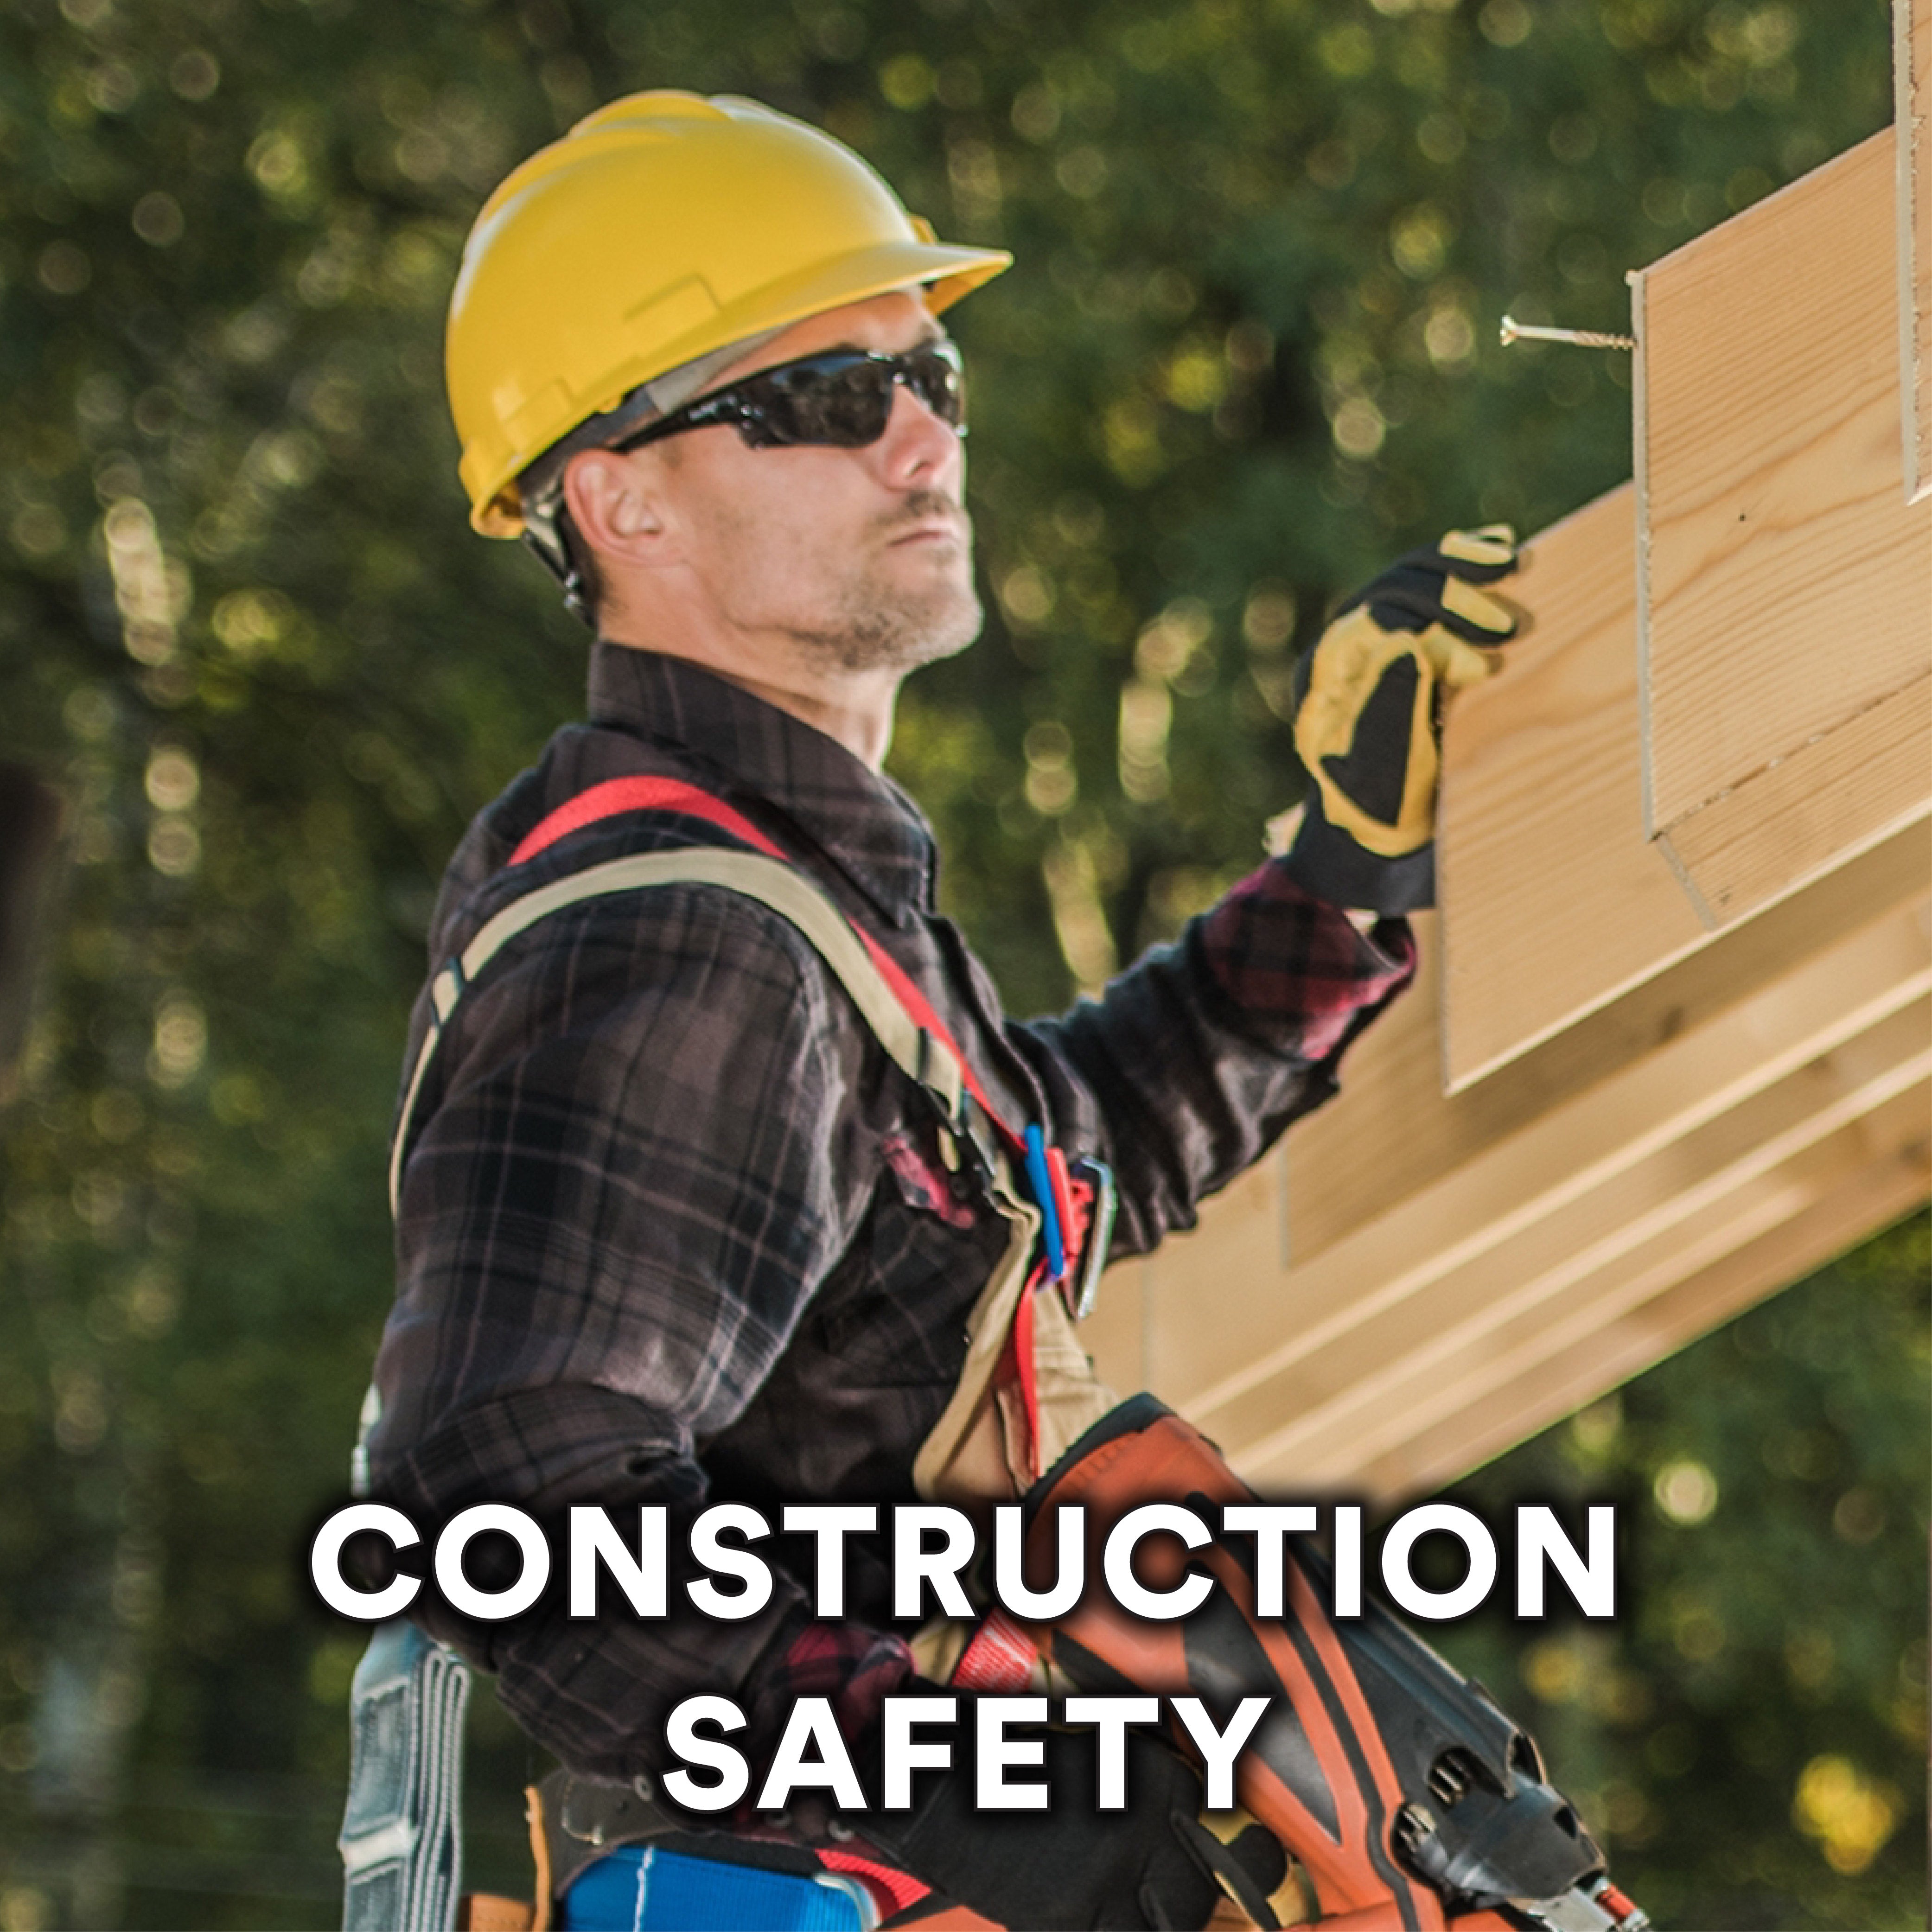 Construction Safety